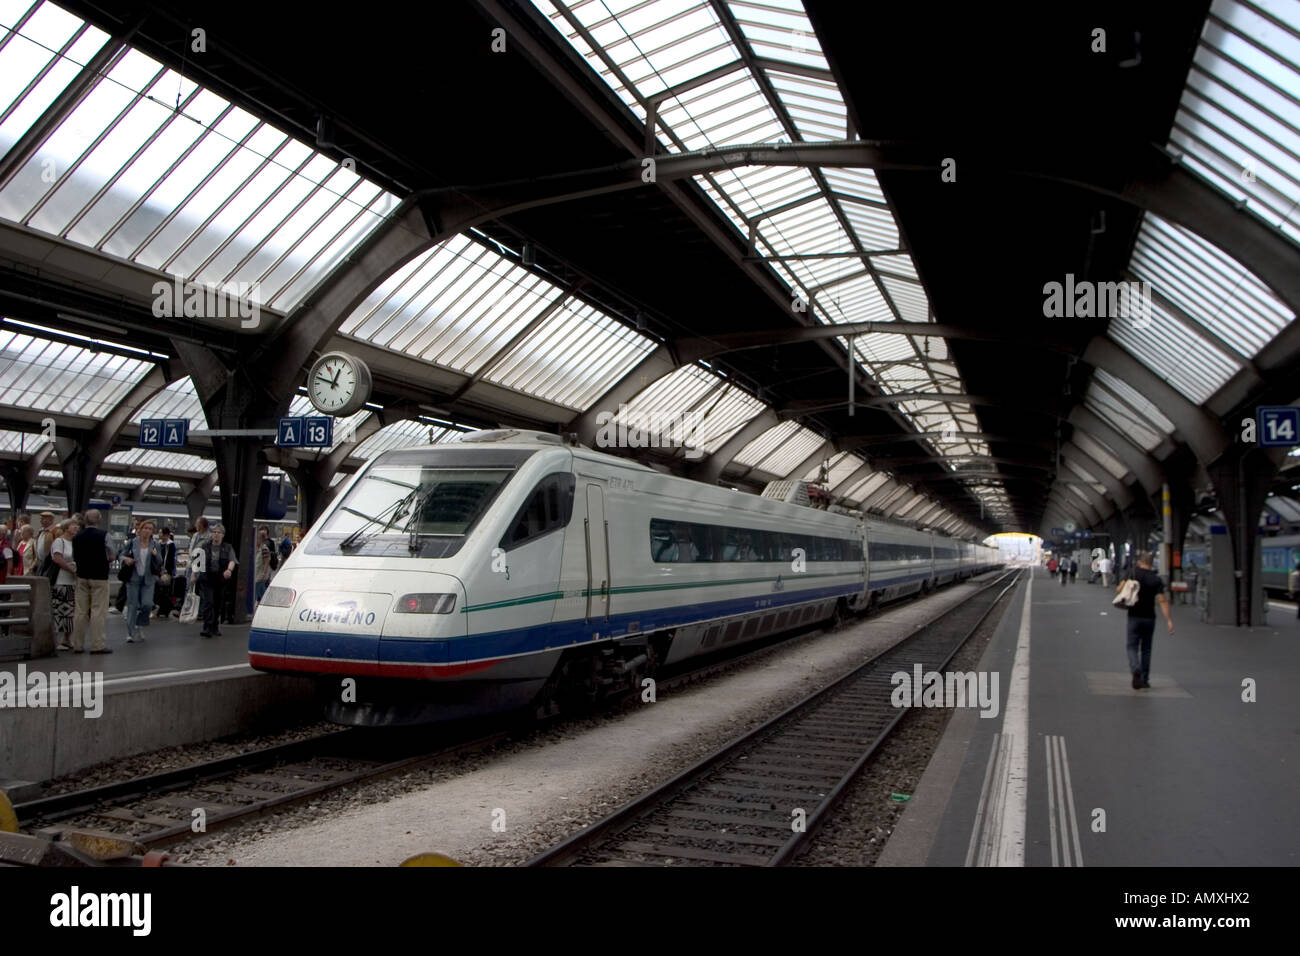 A sleek train is seen at the central train station in Zurich, Switzerland Stock Photo